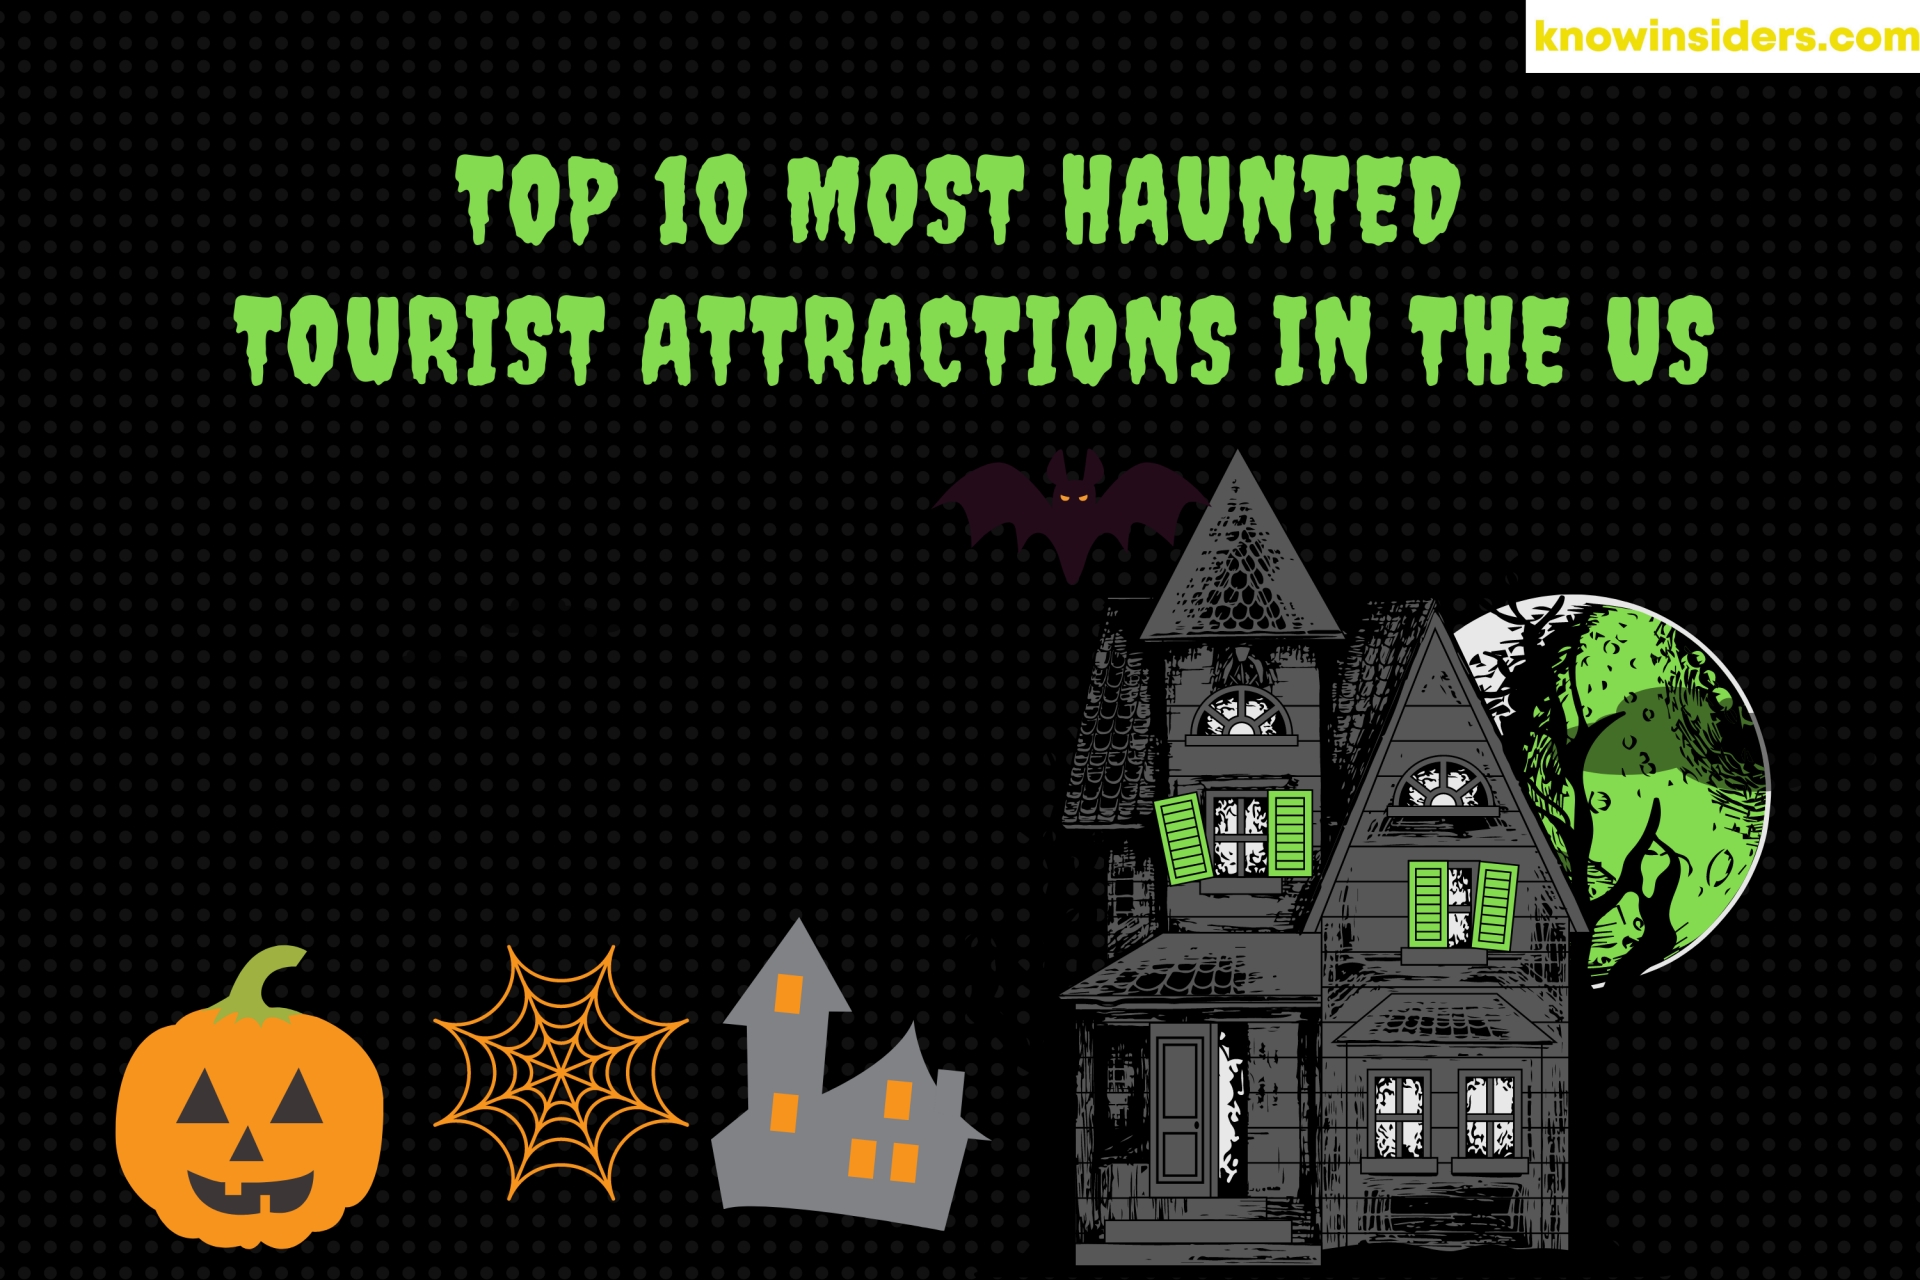 Top 10 Most Haunted Tourist Attractions In The U.S With The Ghost Story